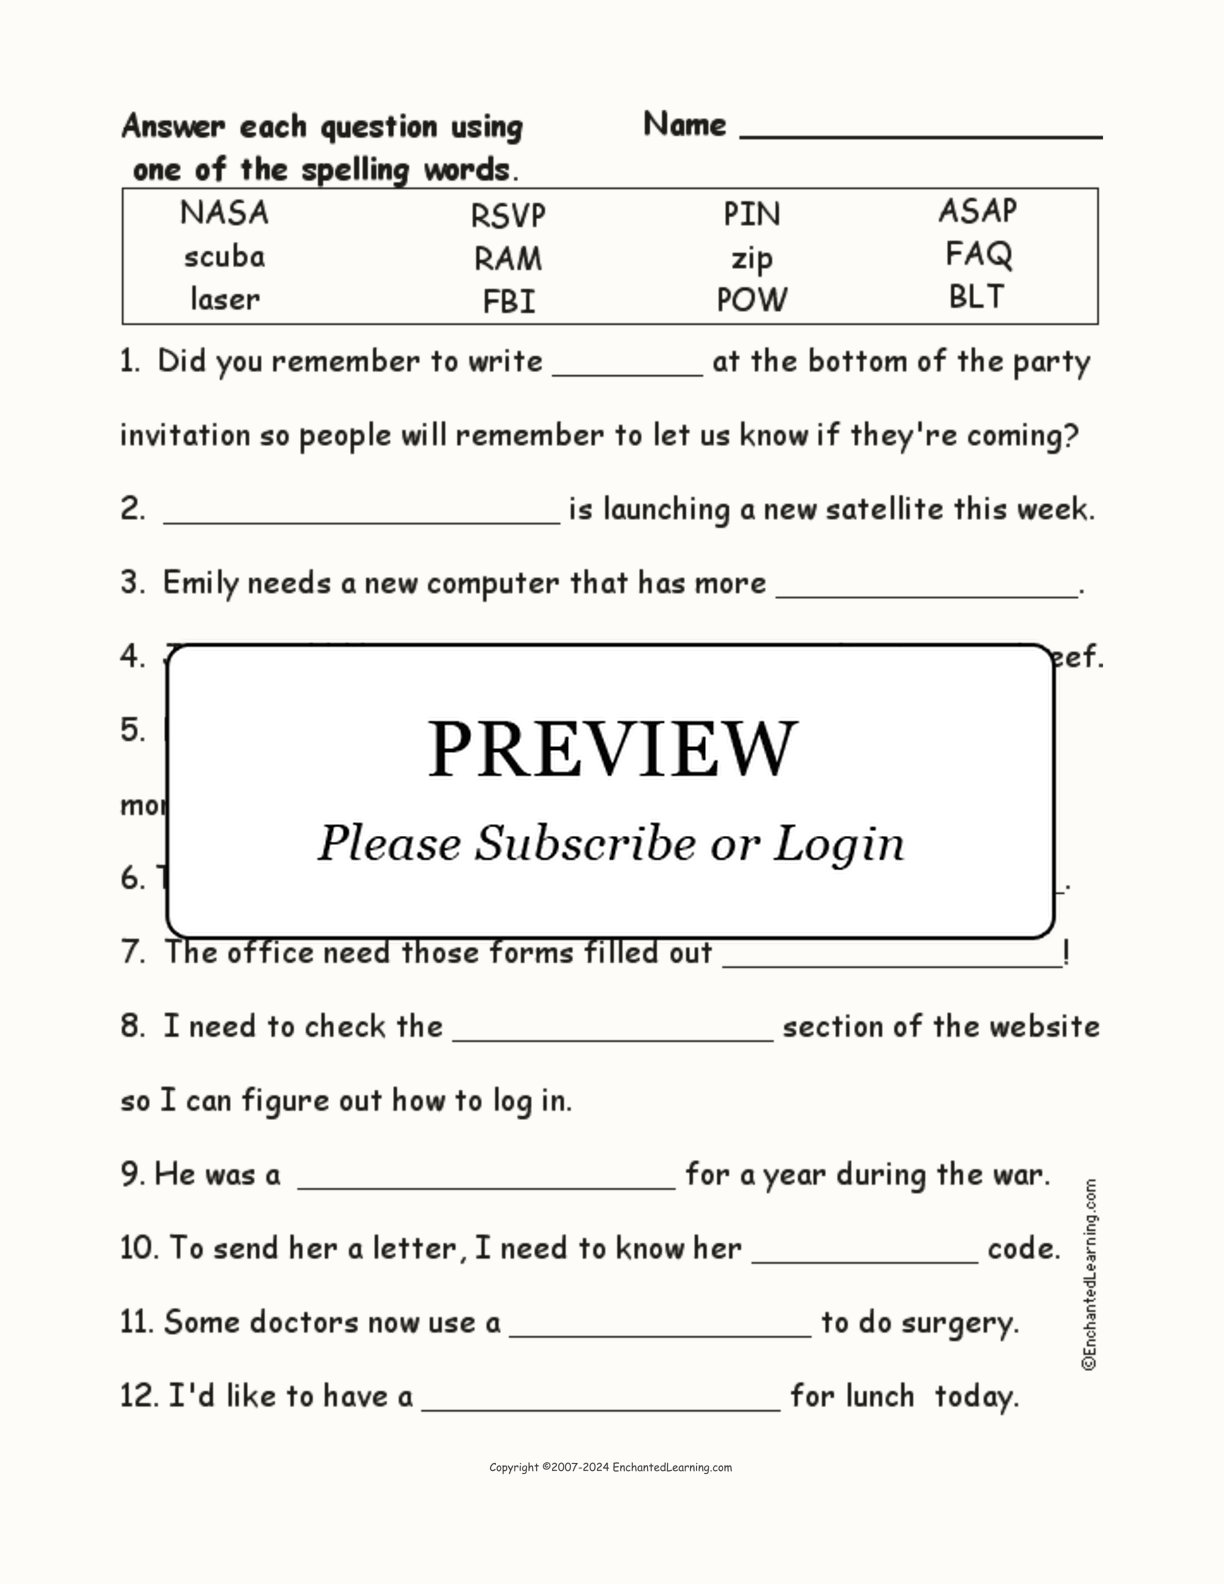 Acronyms Spelling Word Questions interactive worksheet page 1